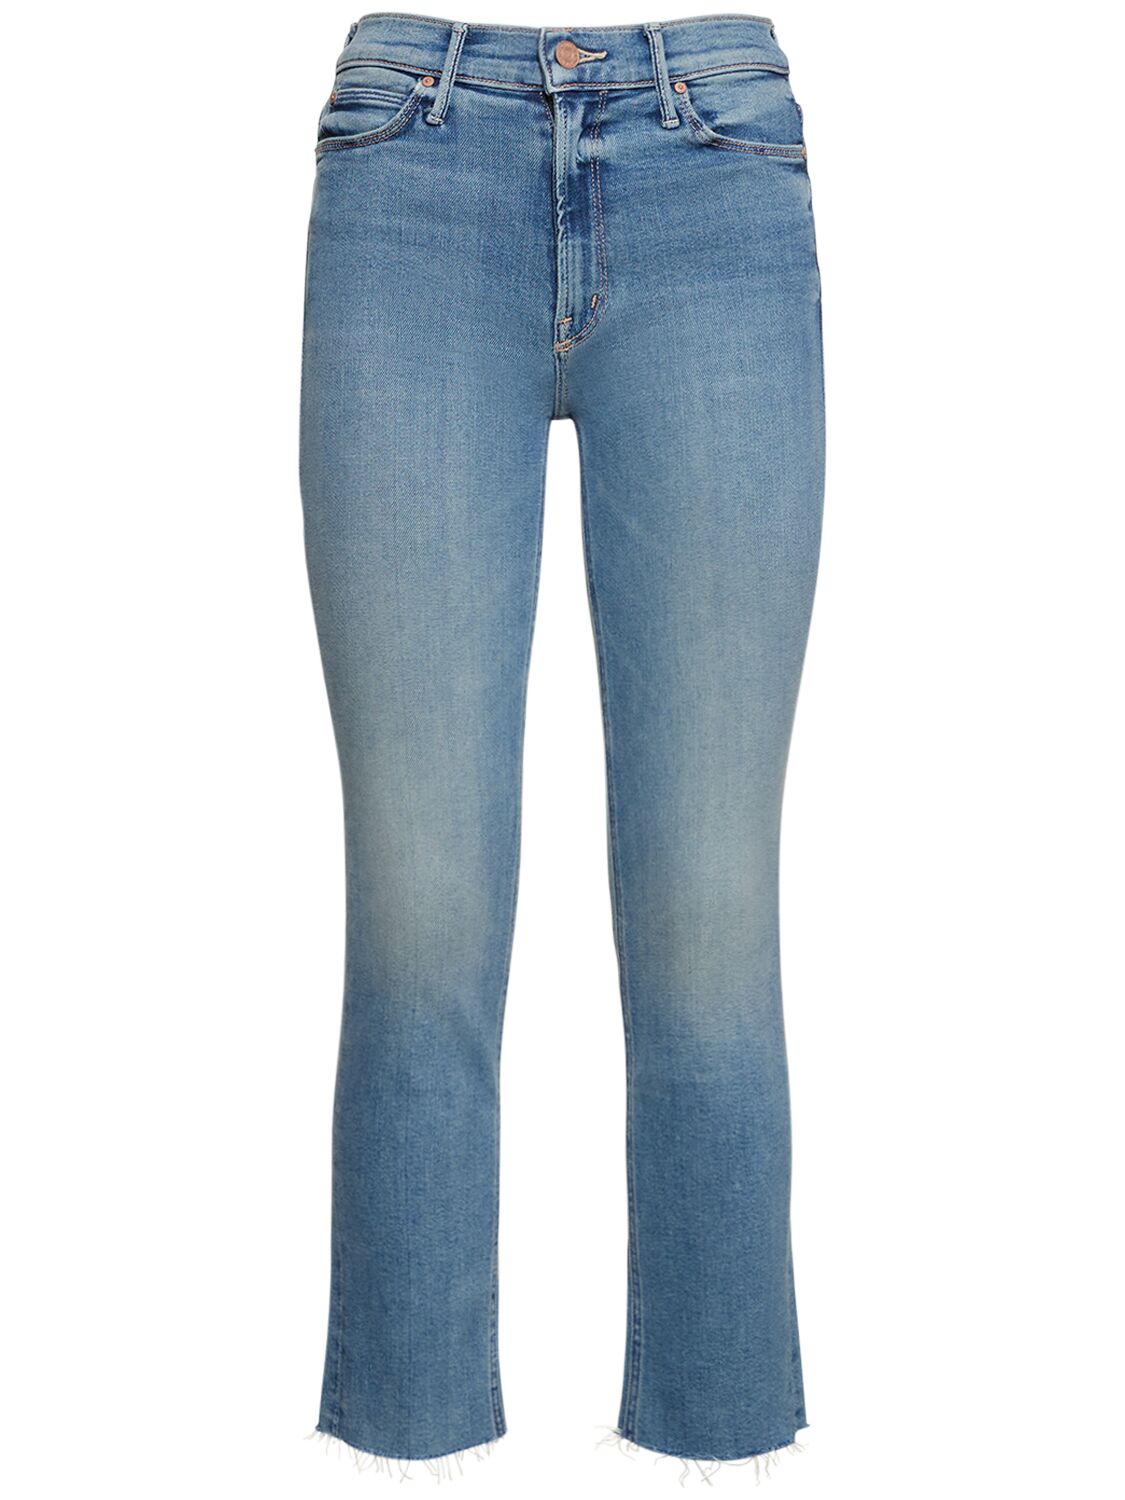 Image of Dazzler Mid Rise Ankle Denim Jeans